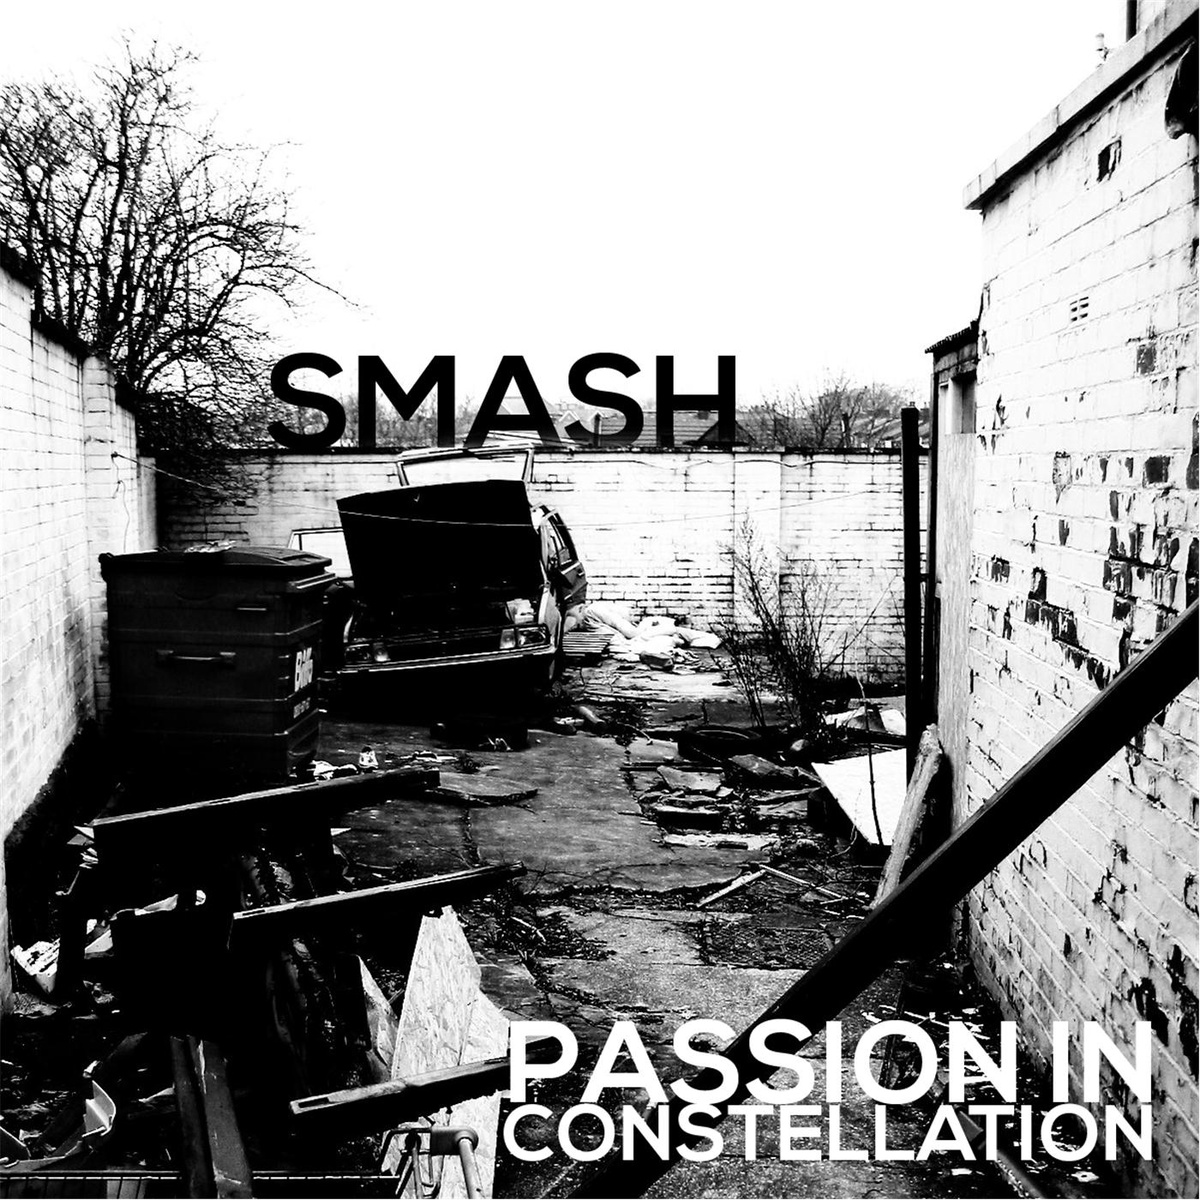 Passion in Constellation Releases Video for “Smash”